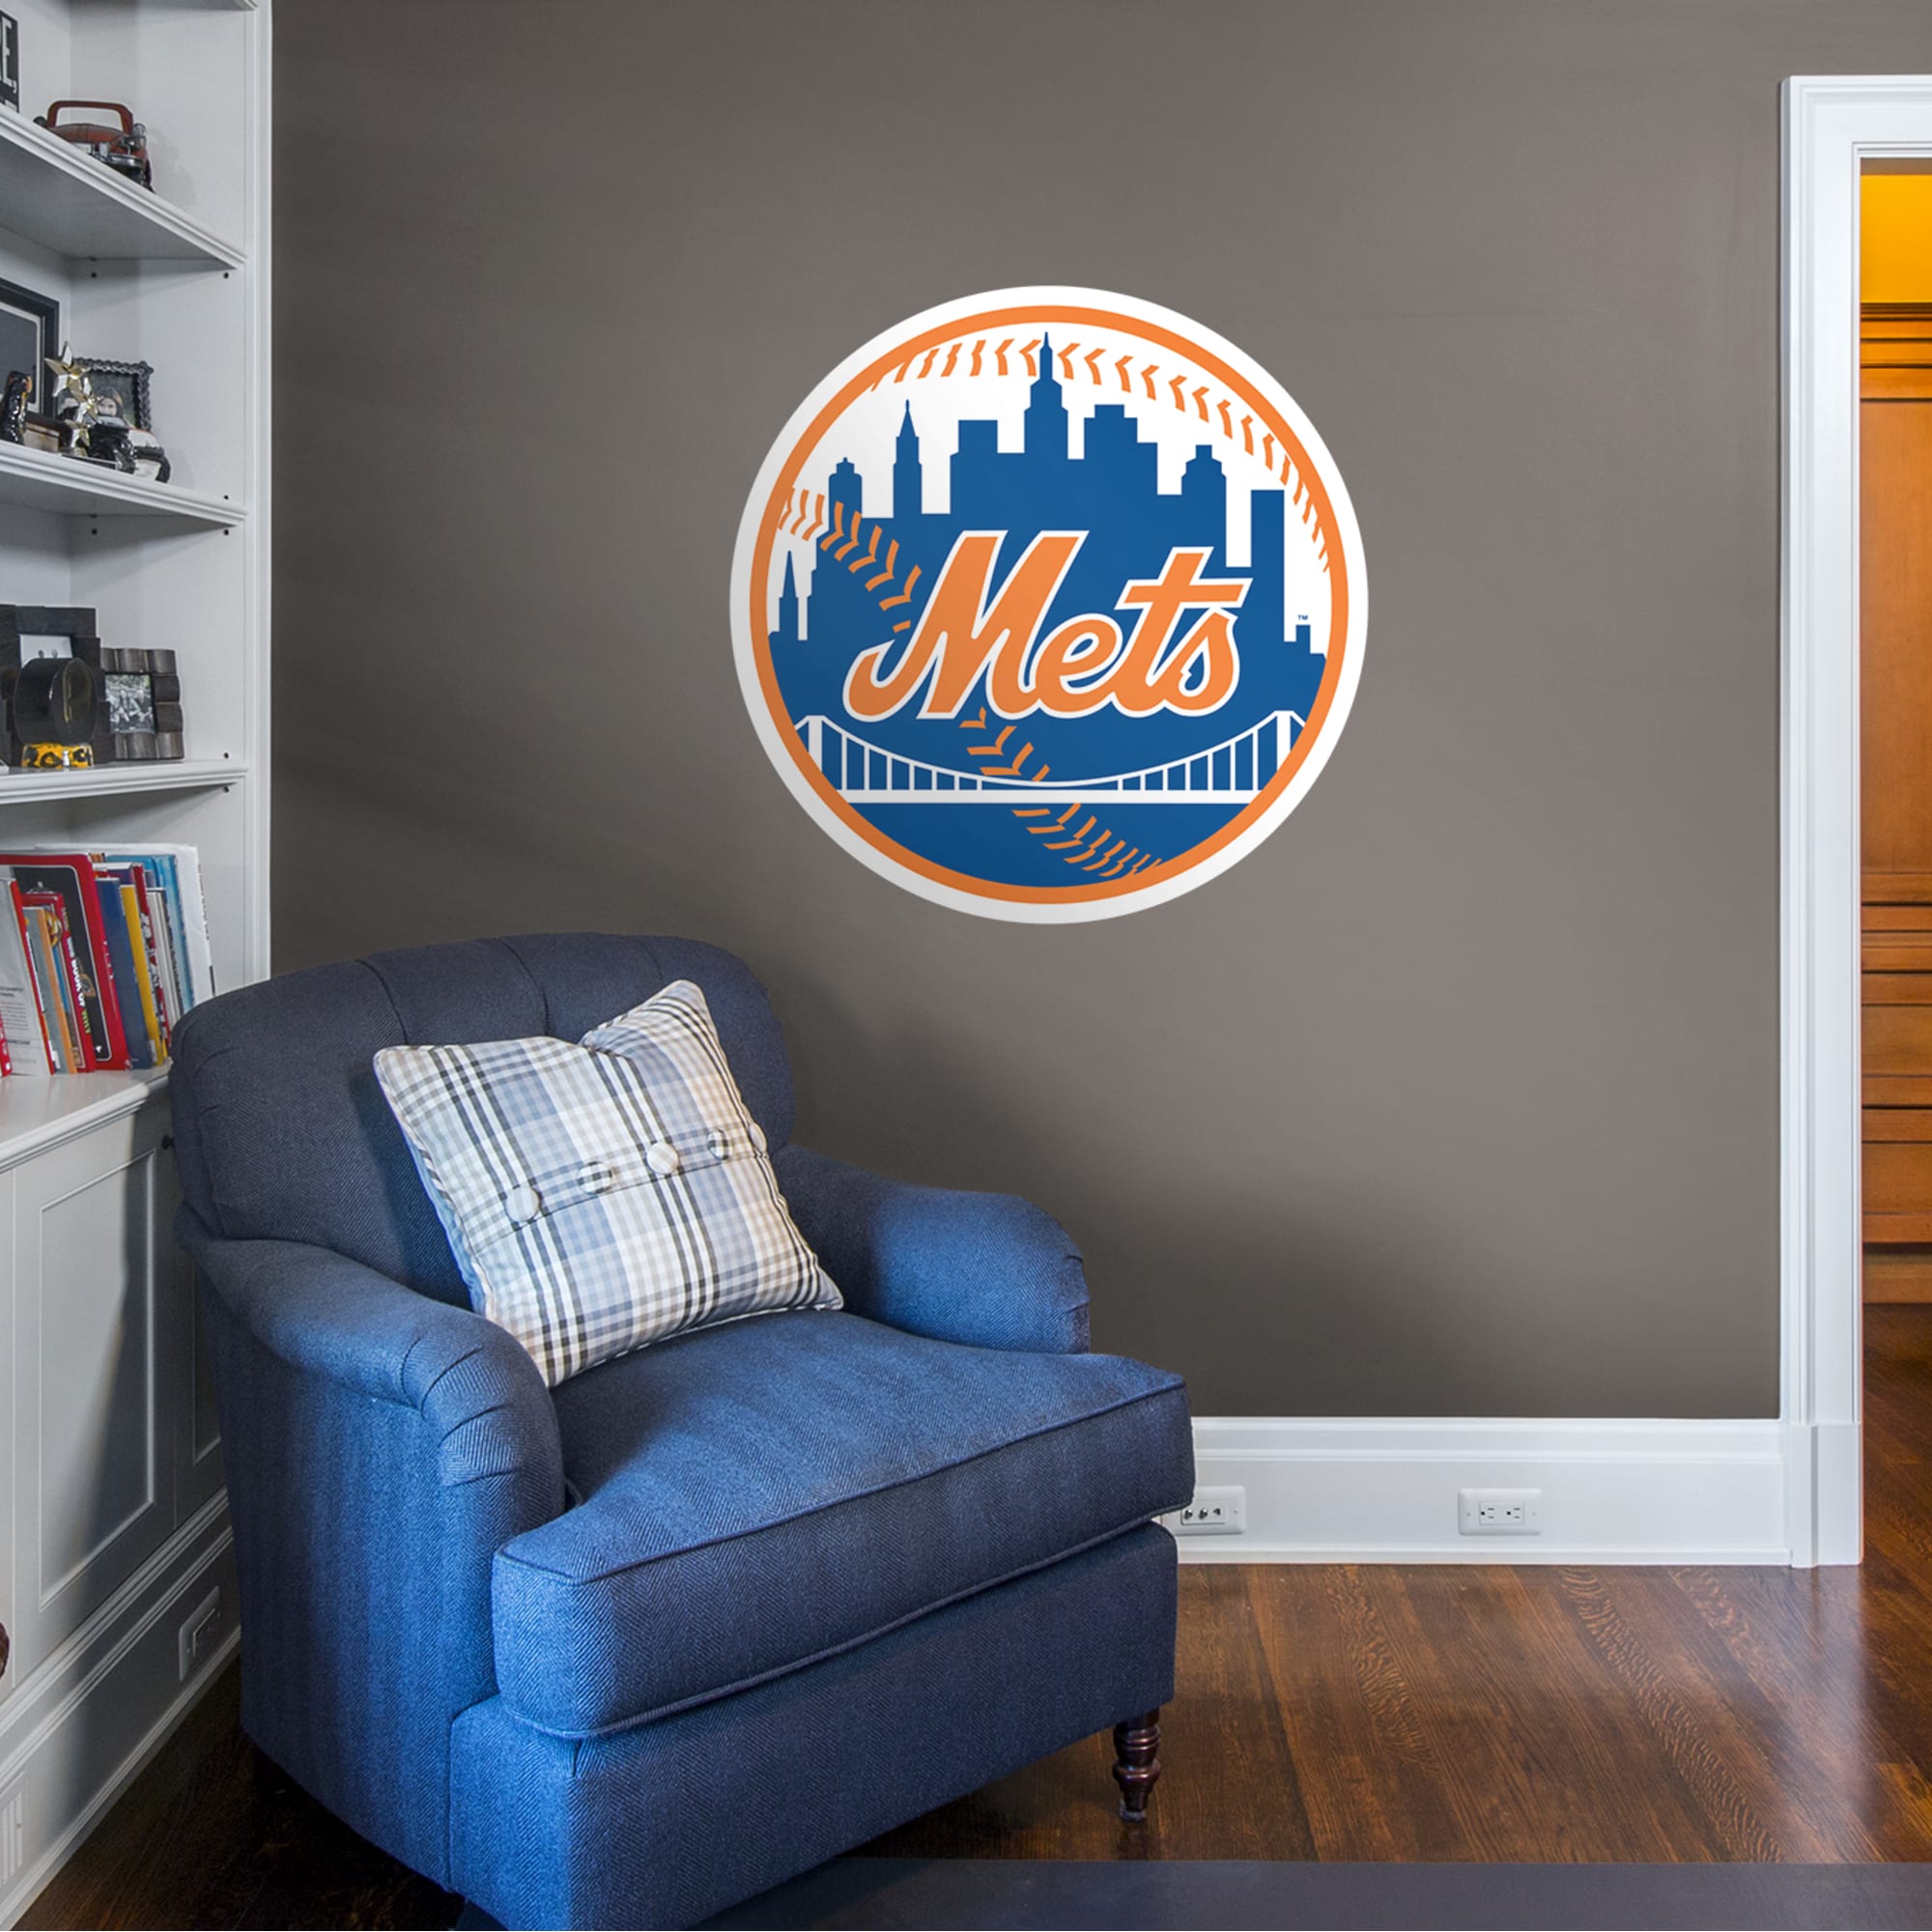 New York Mets: Logo - Officially Licensed MLB Removable Wall Decal Giant Logo (37"W x 37"H) by Fathead | Vinyl